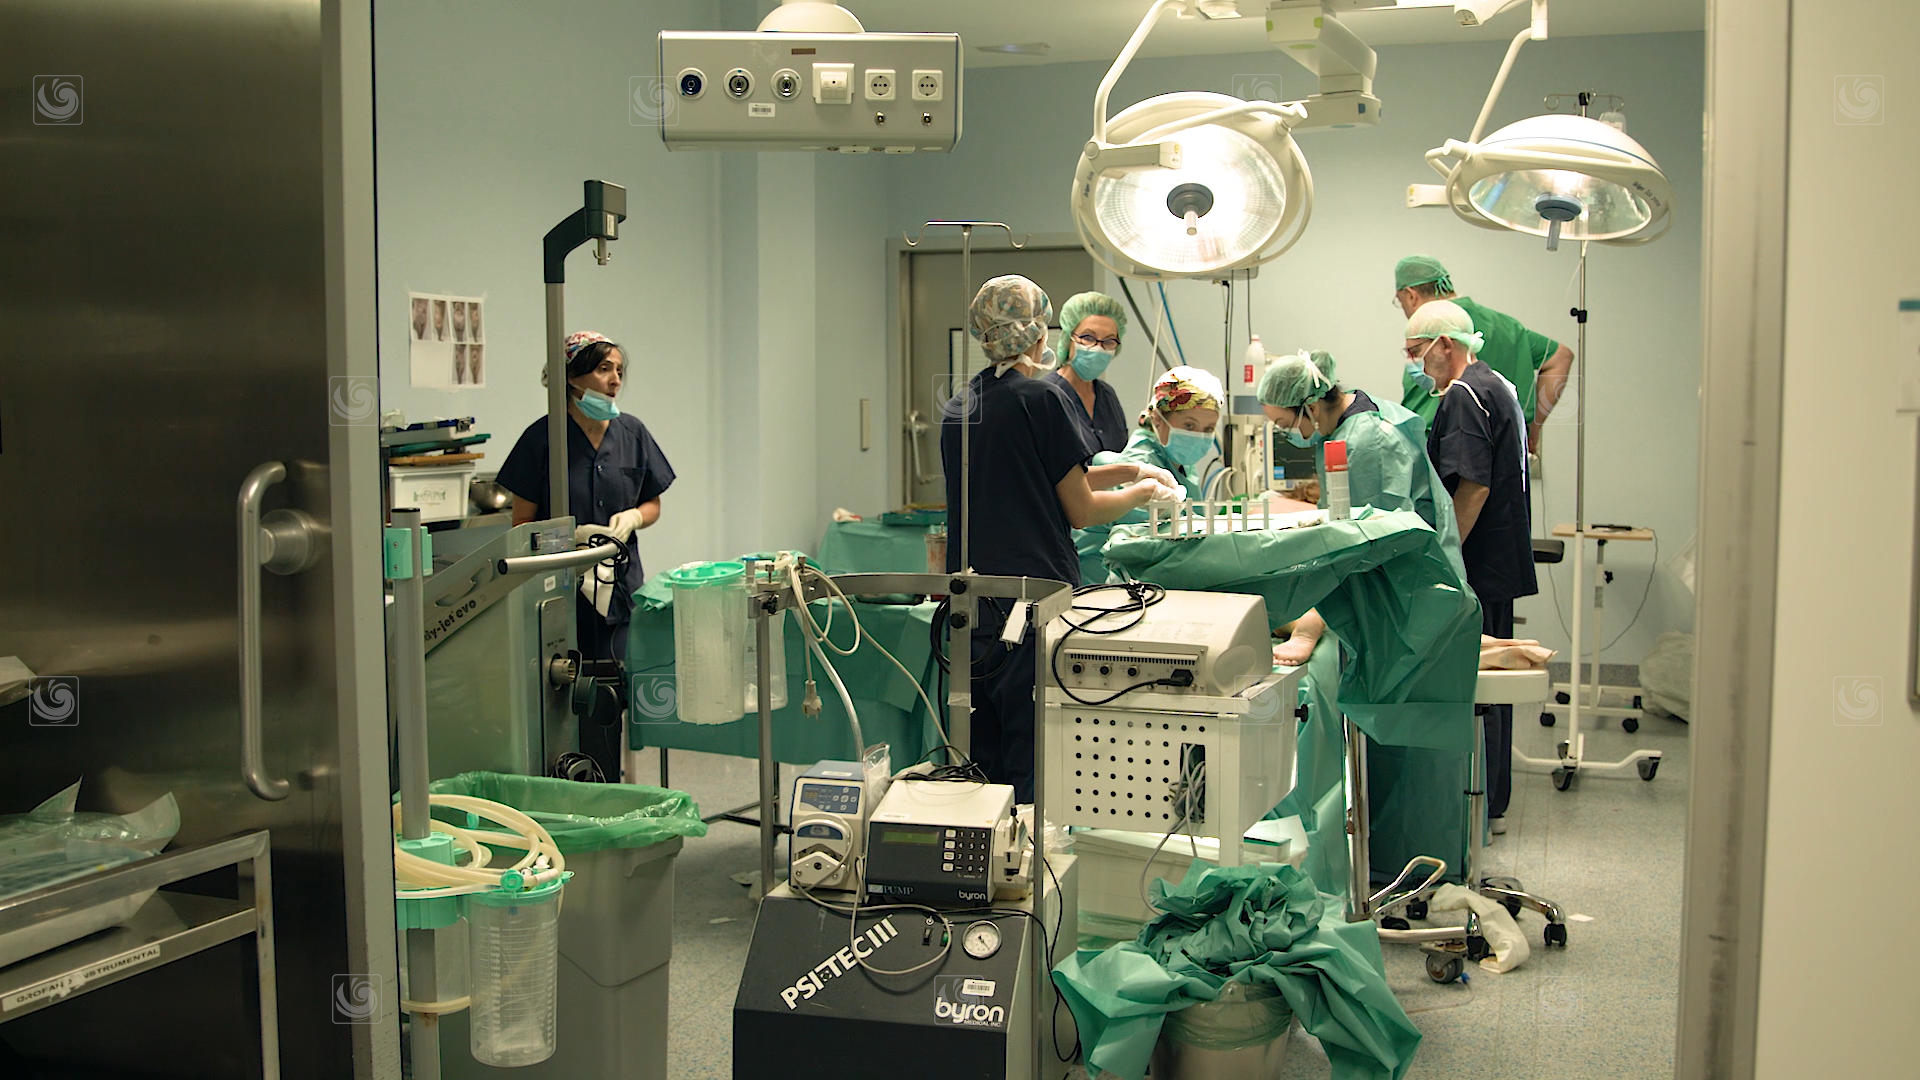 Videoframe showing a general view of the operating room at the start of cosmetic surgery